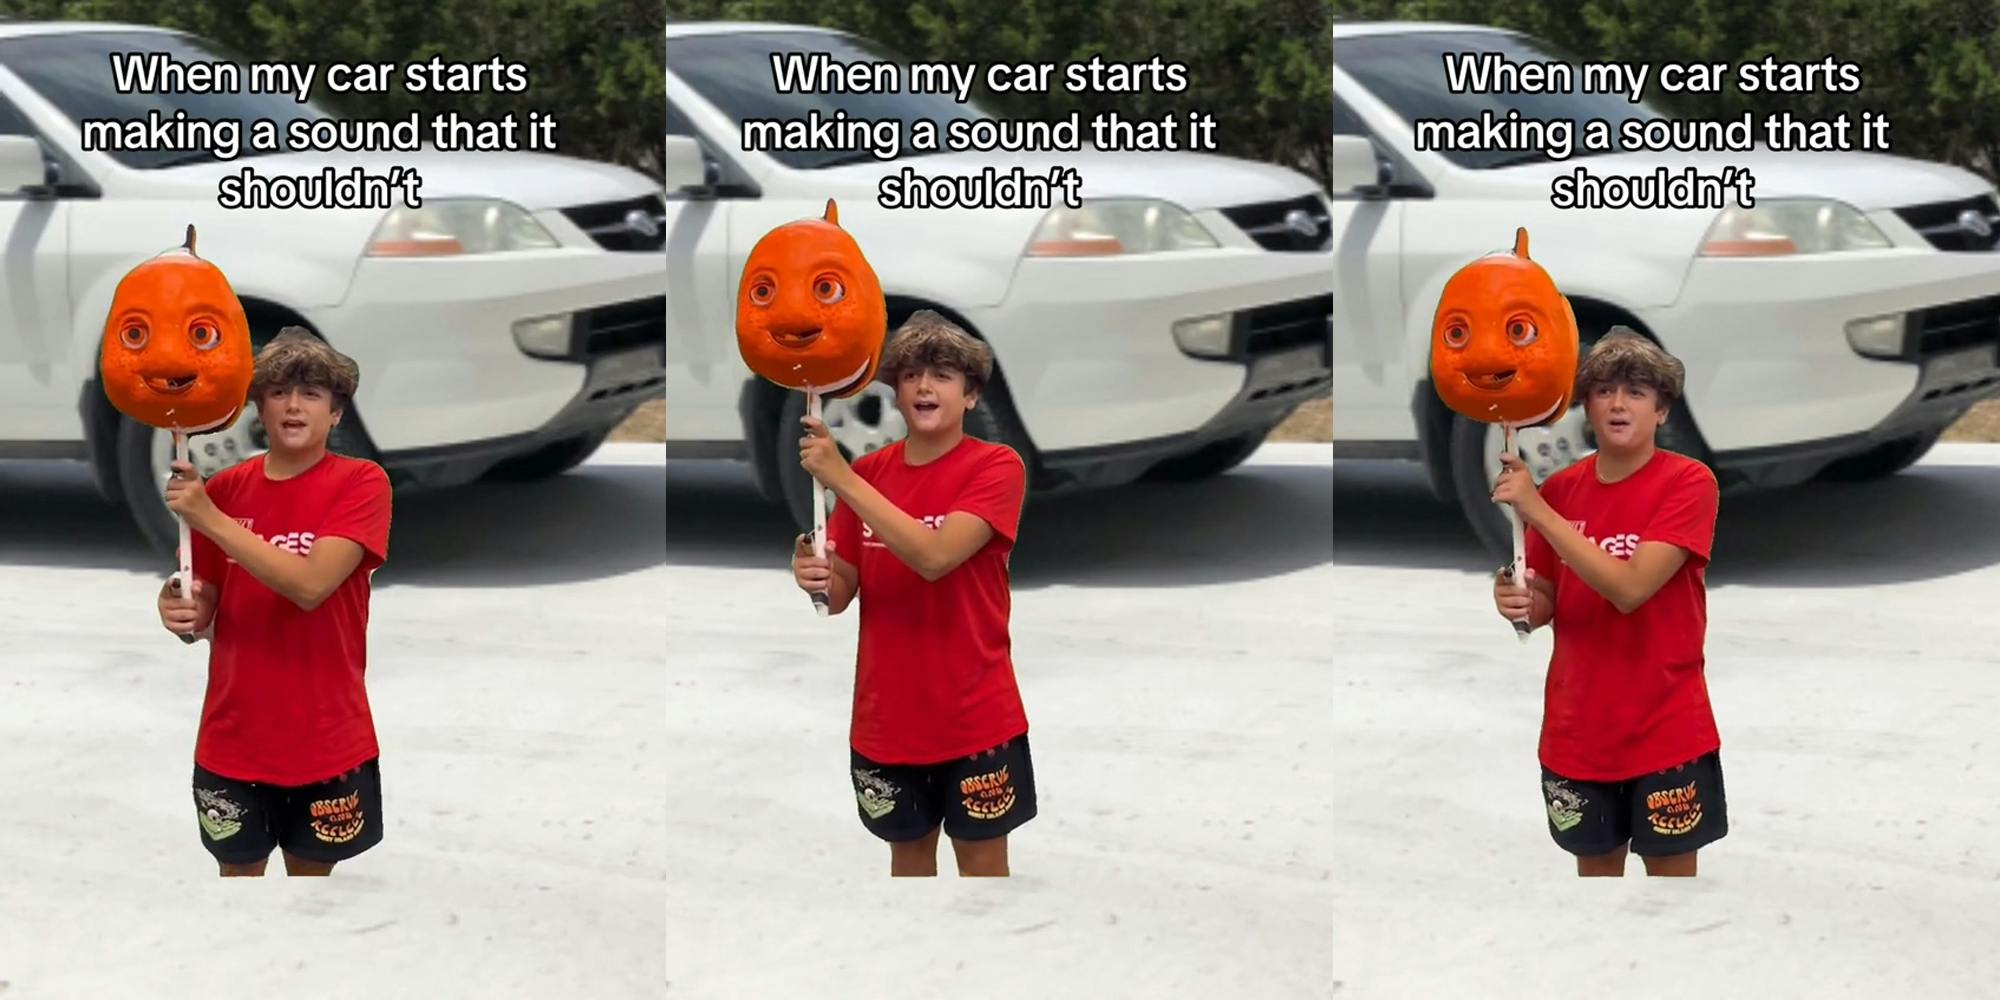 kid singing holding Nemo on stick in front of image of car with caption "When my car starts making a sound that it shouldn't" (l) kid singing holding Nemo on stick in front of image of car with caption "When my car starts making a sound that it shouldn't" (c) kid singing holding Nemo on stick in front of image of car with caption "When my car starts making a sound that it shouldn't" (r)